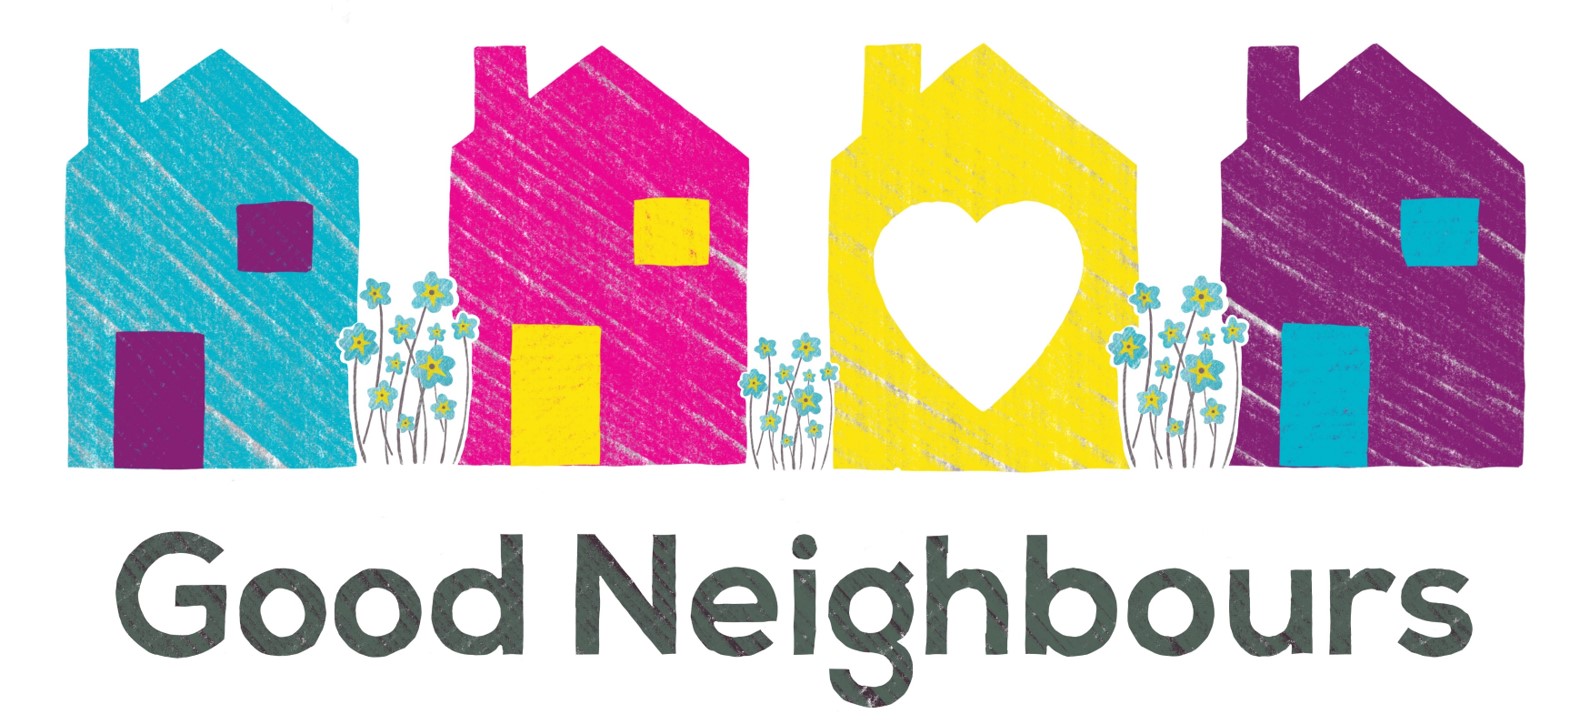 Good Neighbours logo with forget-me-not flowers